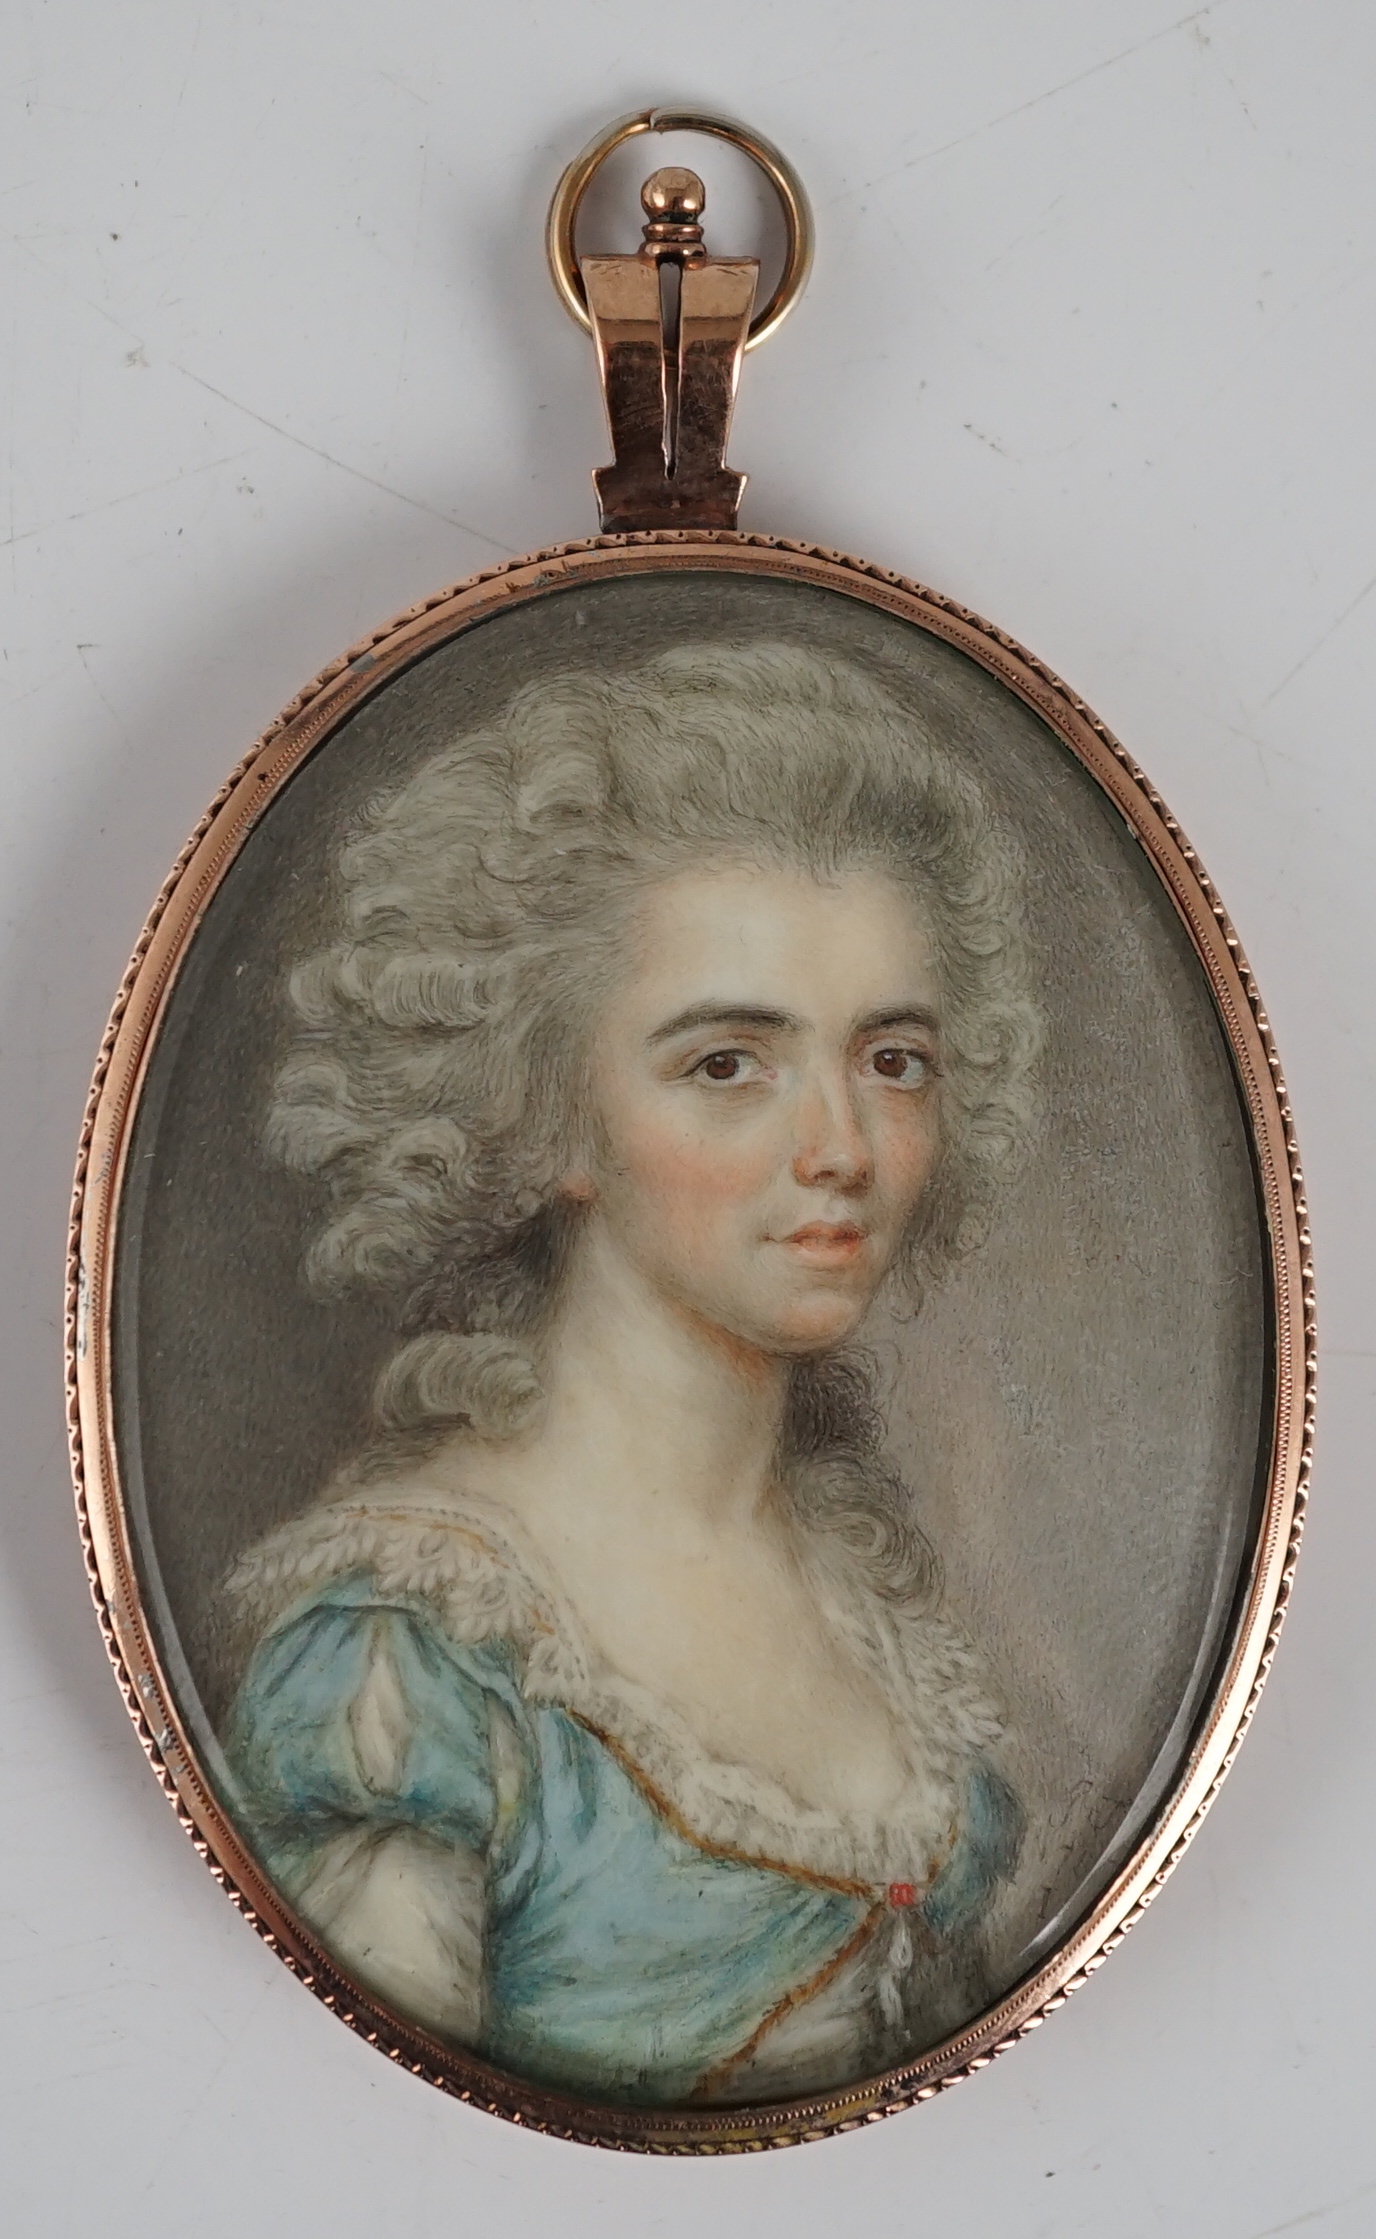 John Smart (British, 1742-1811), Portrait miniature of a lady, oil on ivory, 5.6 x 4.1cm. CITES Submission reference 7L721KC3